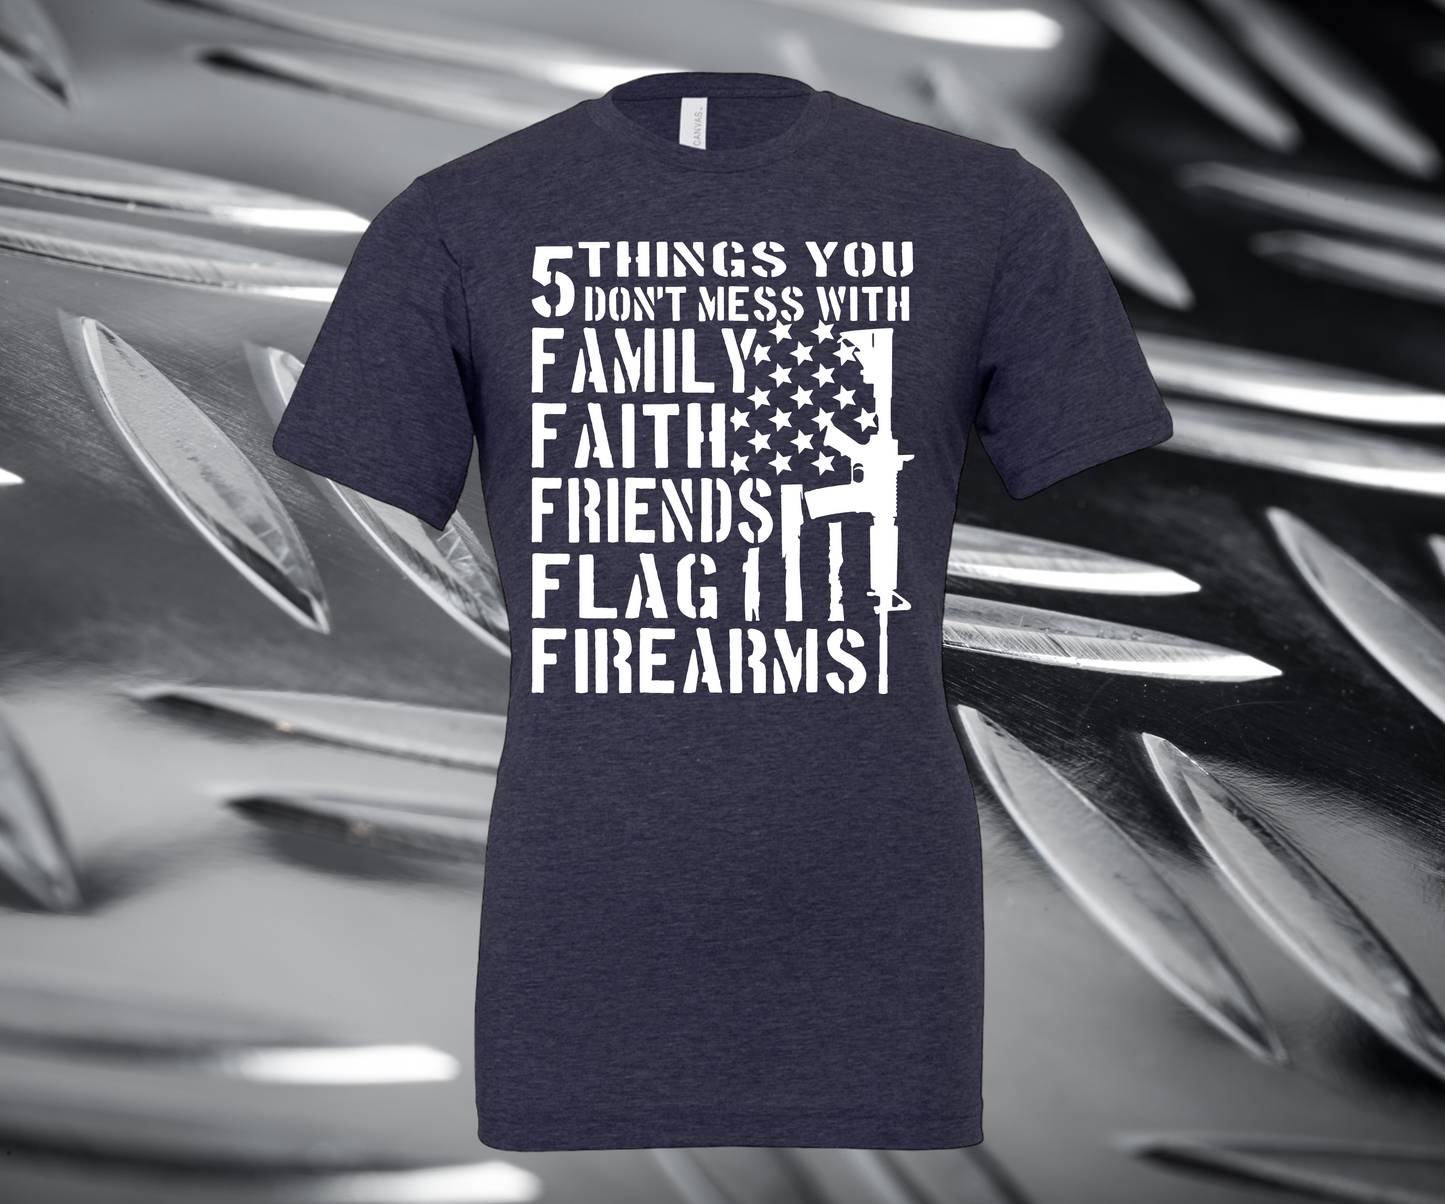 5 Things You Don't Mess With-FAMILY FAITH  FRIENDS  FLAG  FIREARMS Unisex Graphic Tee